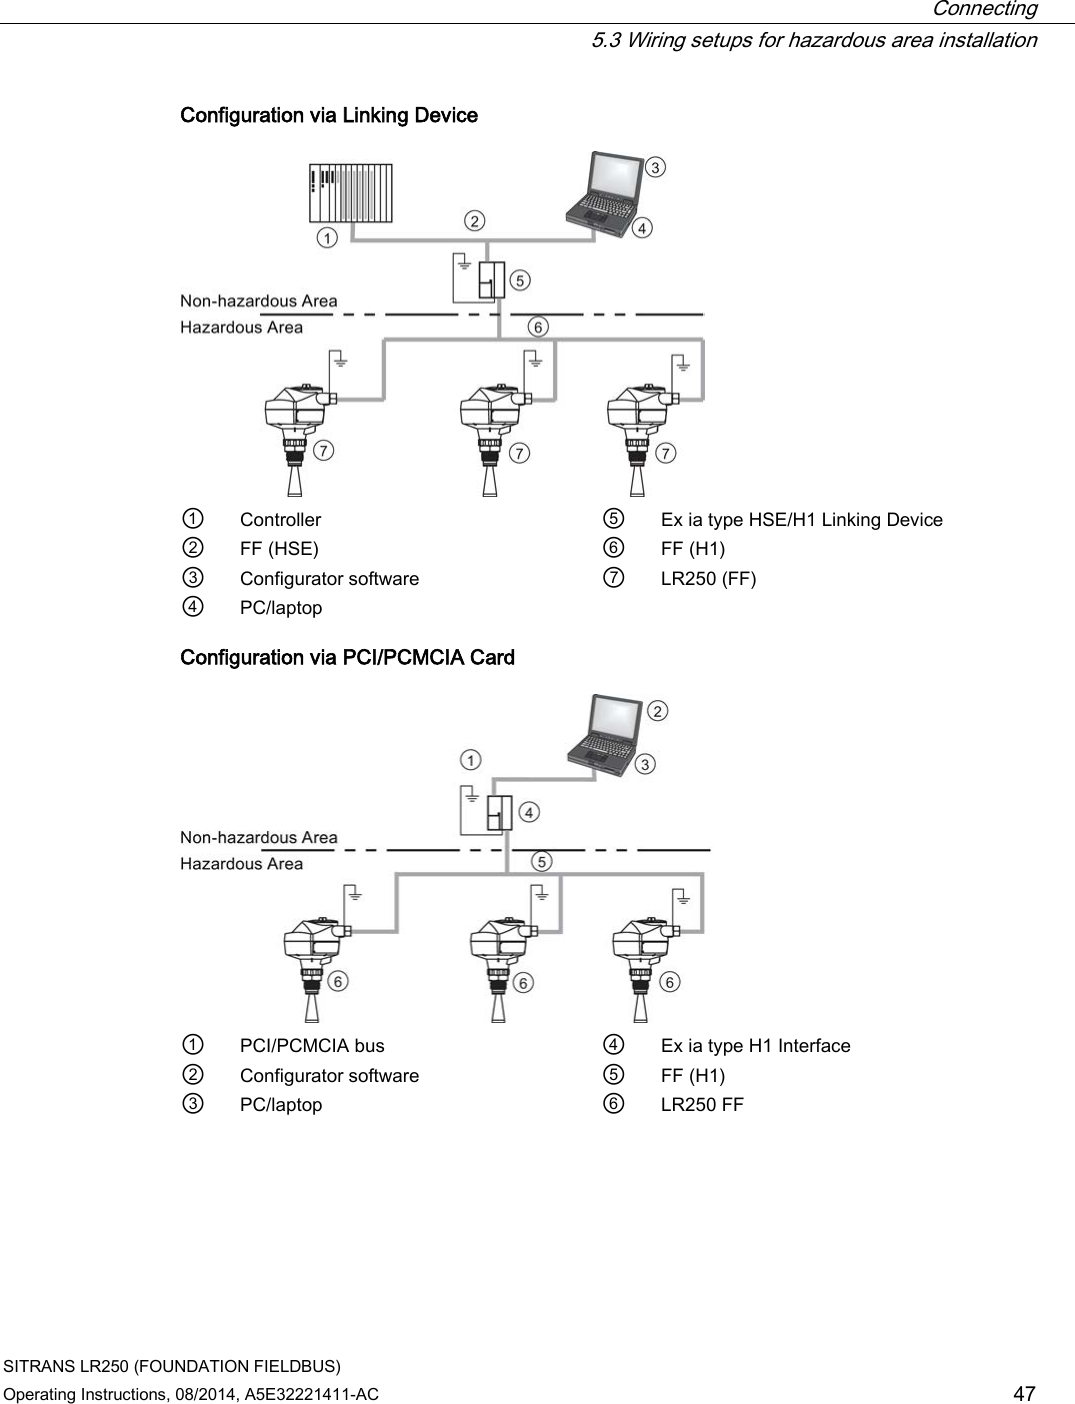  Connecting  5.3 Wiring setups for hazardous area installation SITRANS LR250 (FOUNDATION FIELDBUS) Operating Instructions, 08/2014, A5E32221411-AC 47 Configuration via Linking Device  ① Controller ⑤ Ex ia type HSE/H1 Linking Device ② FF (HSE) ⑥ FF (H1) ③ Configurator software ⑦ LR250 (FF) ④ PC/laptop   Configuration via PCI/PCMCIA Card  ① PCI/PCMCIA bus ④ Ex ia type H1 Interface ② Configurator software ⑤ FF (H1) ③ PC/laptop ⑥ LR250 FF 